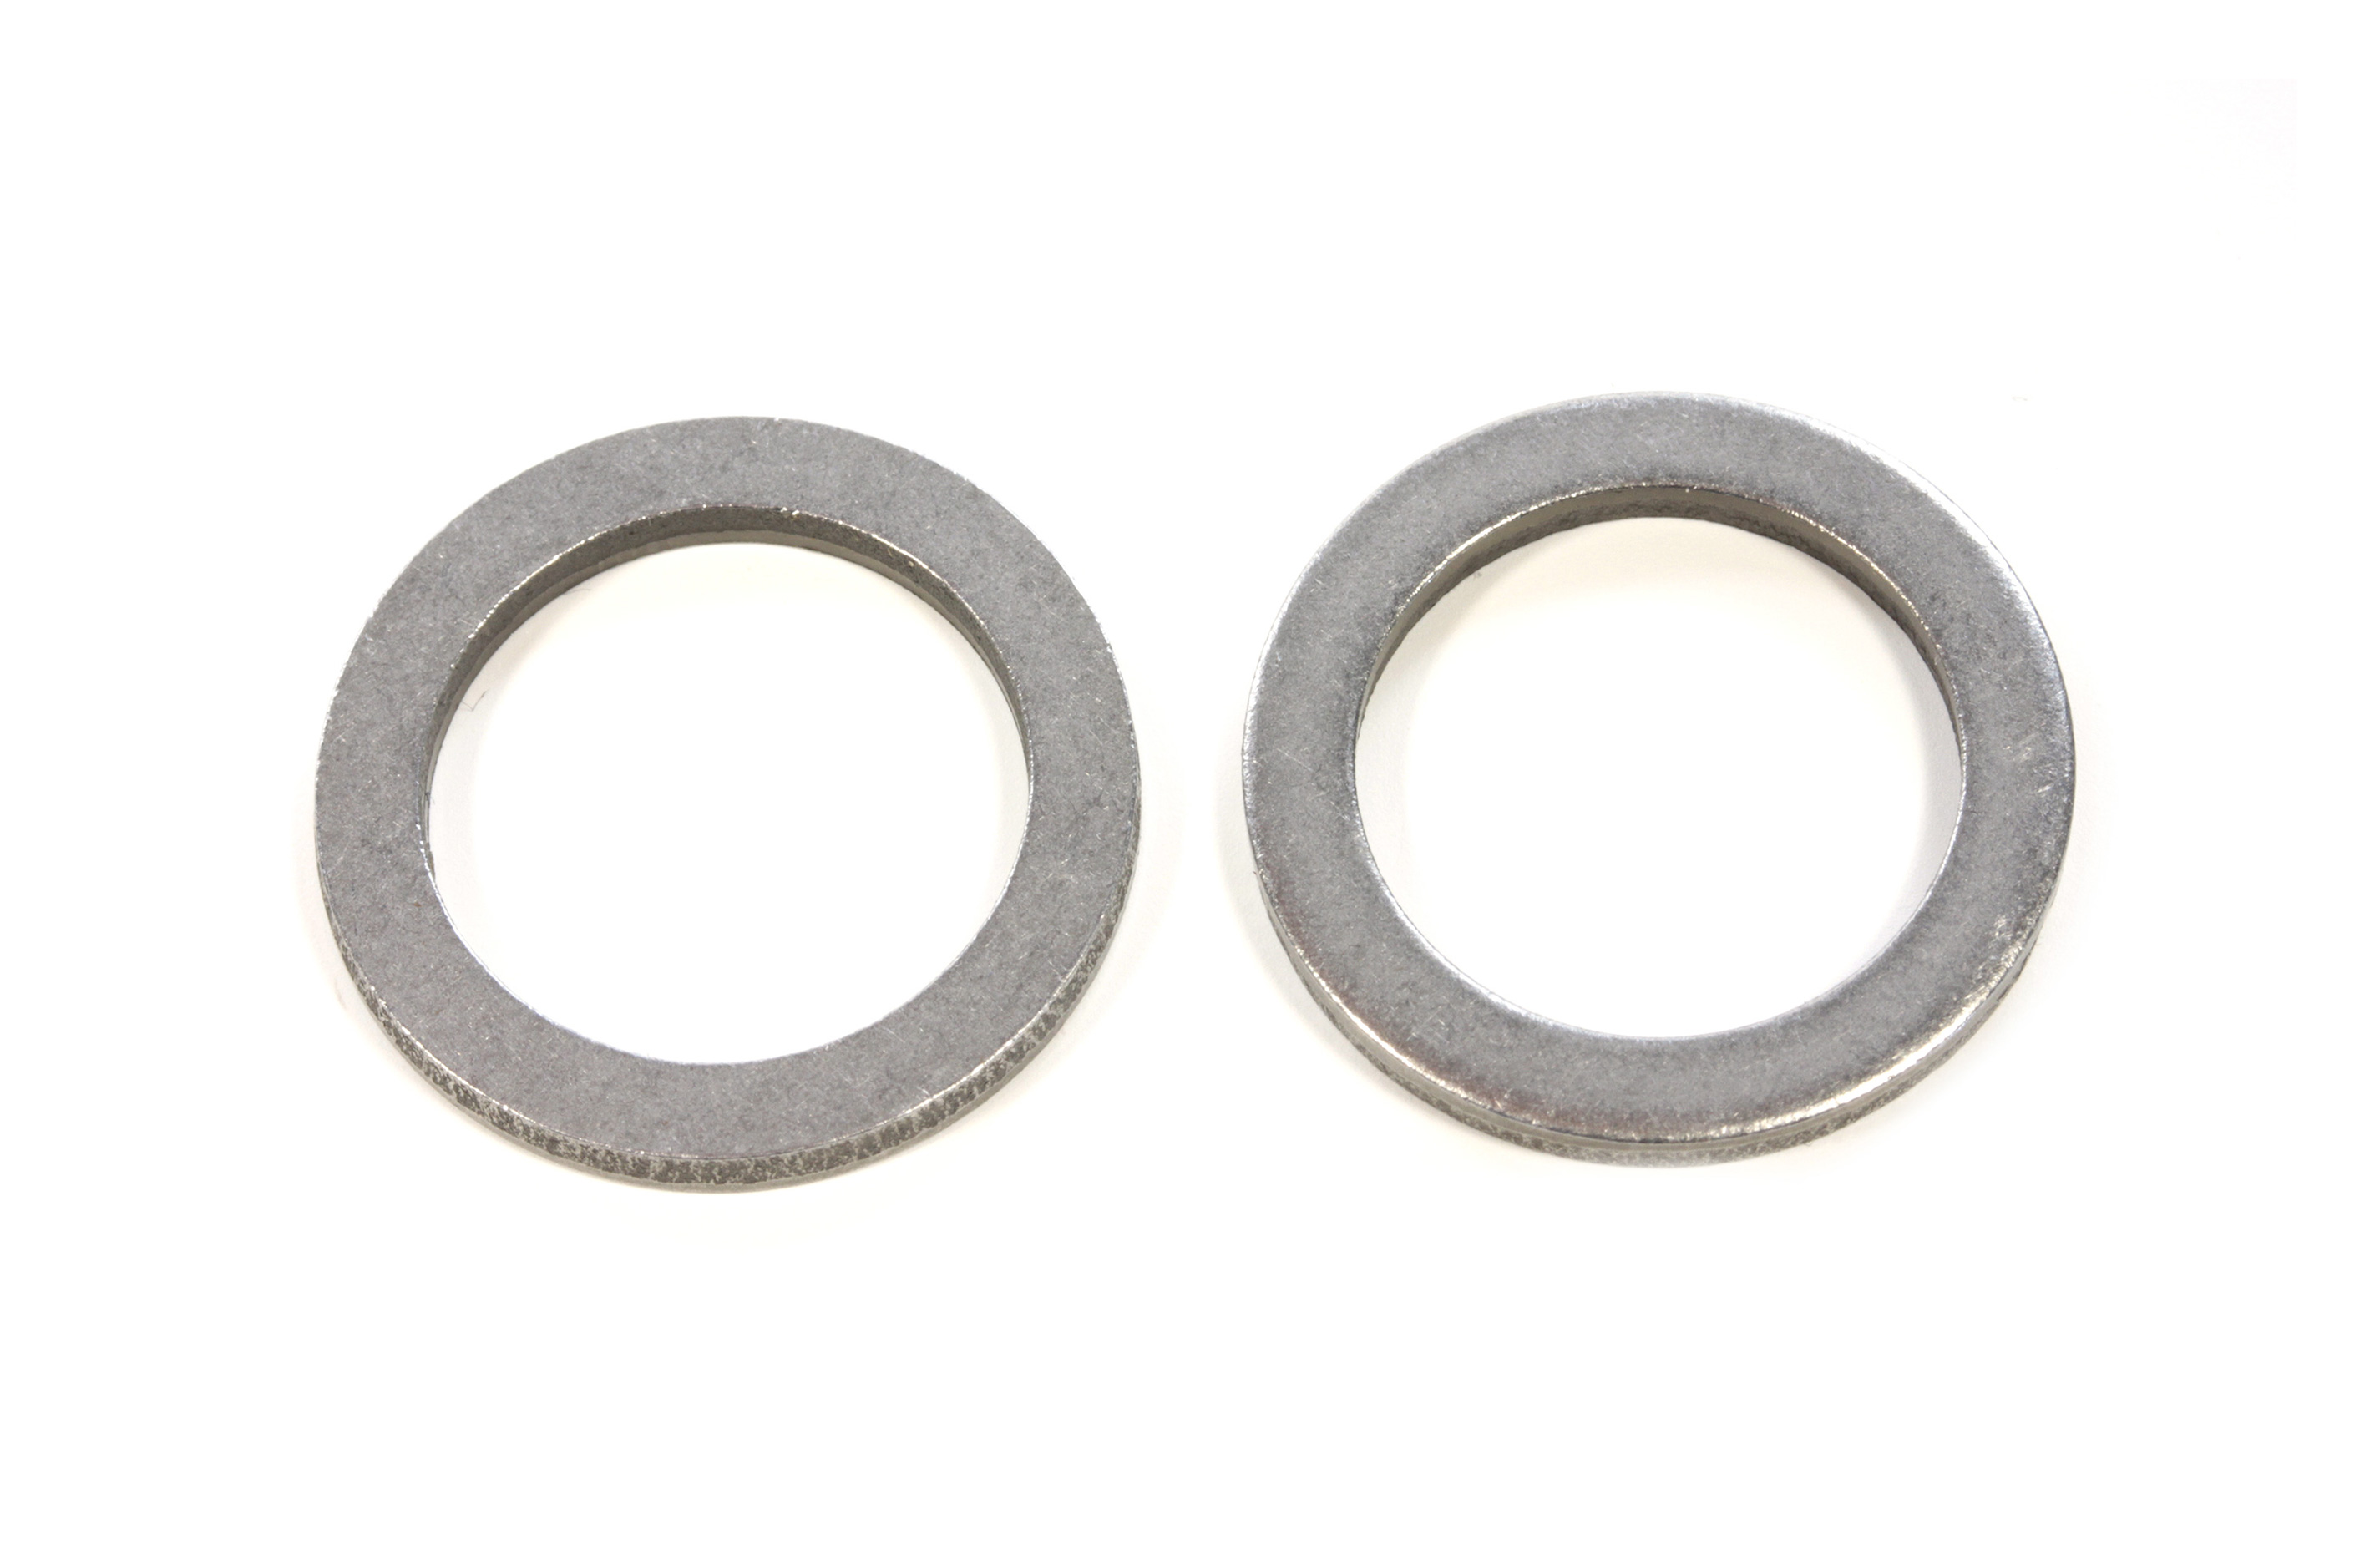 AREA-5T-007/02 Spacer shims 15 x 21 x 2.0 mm for AREA-5T-007